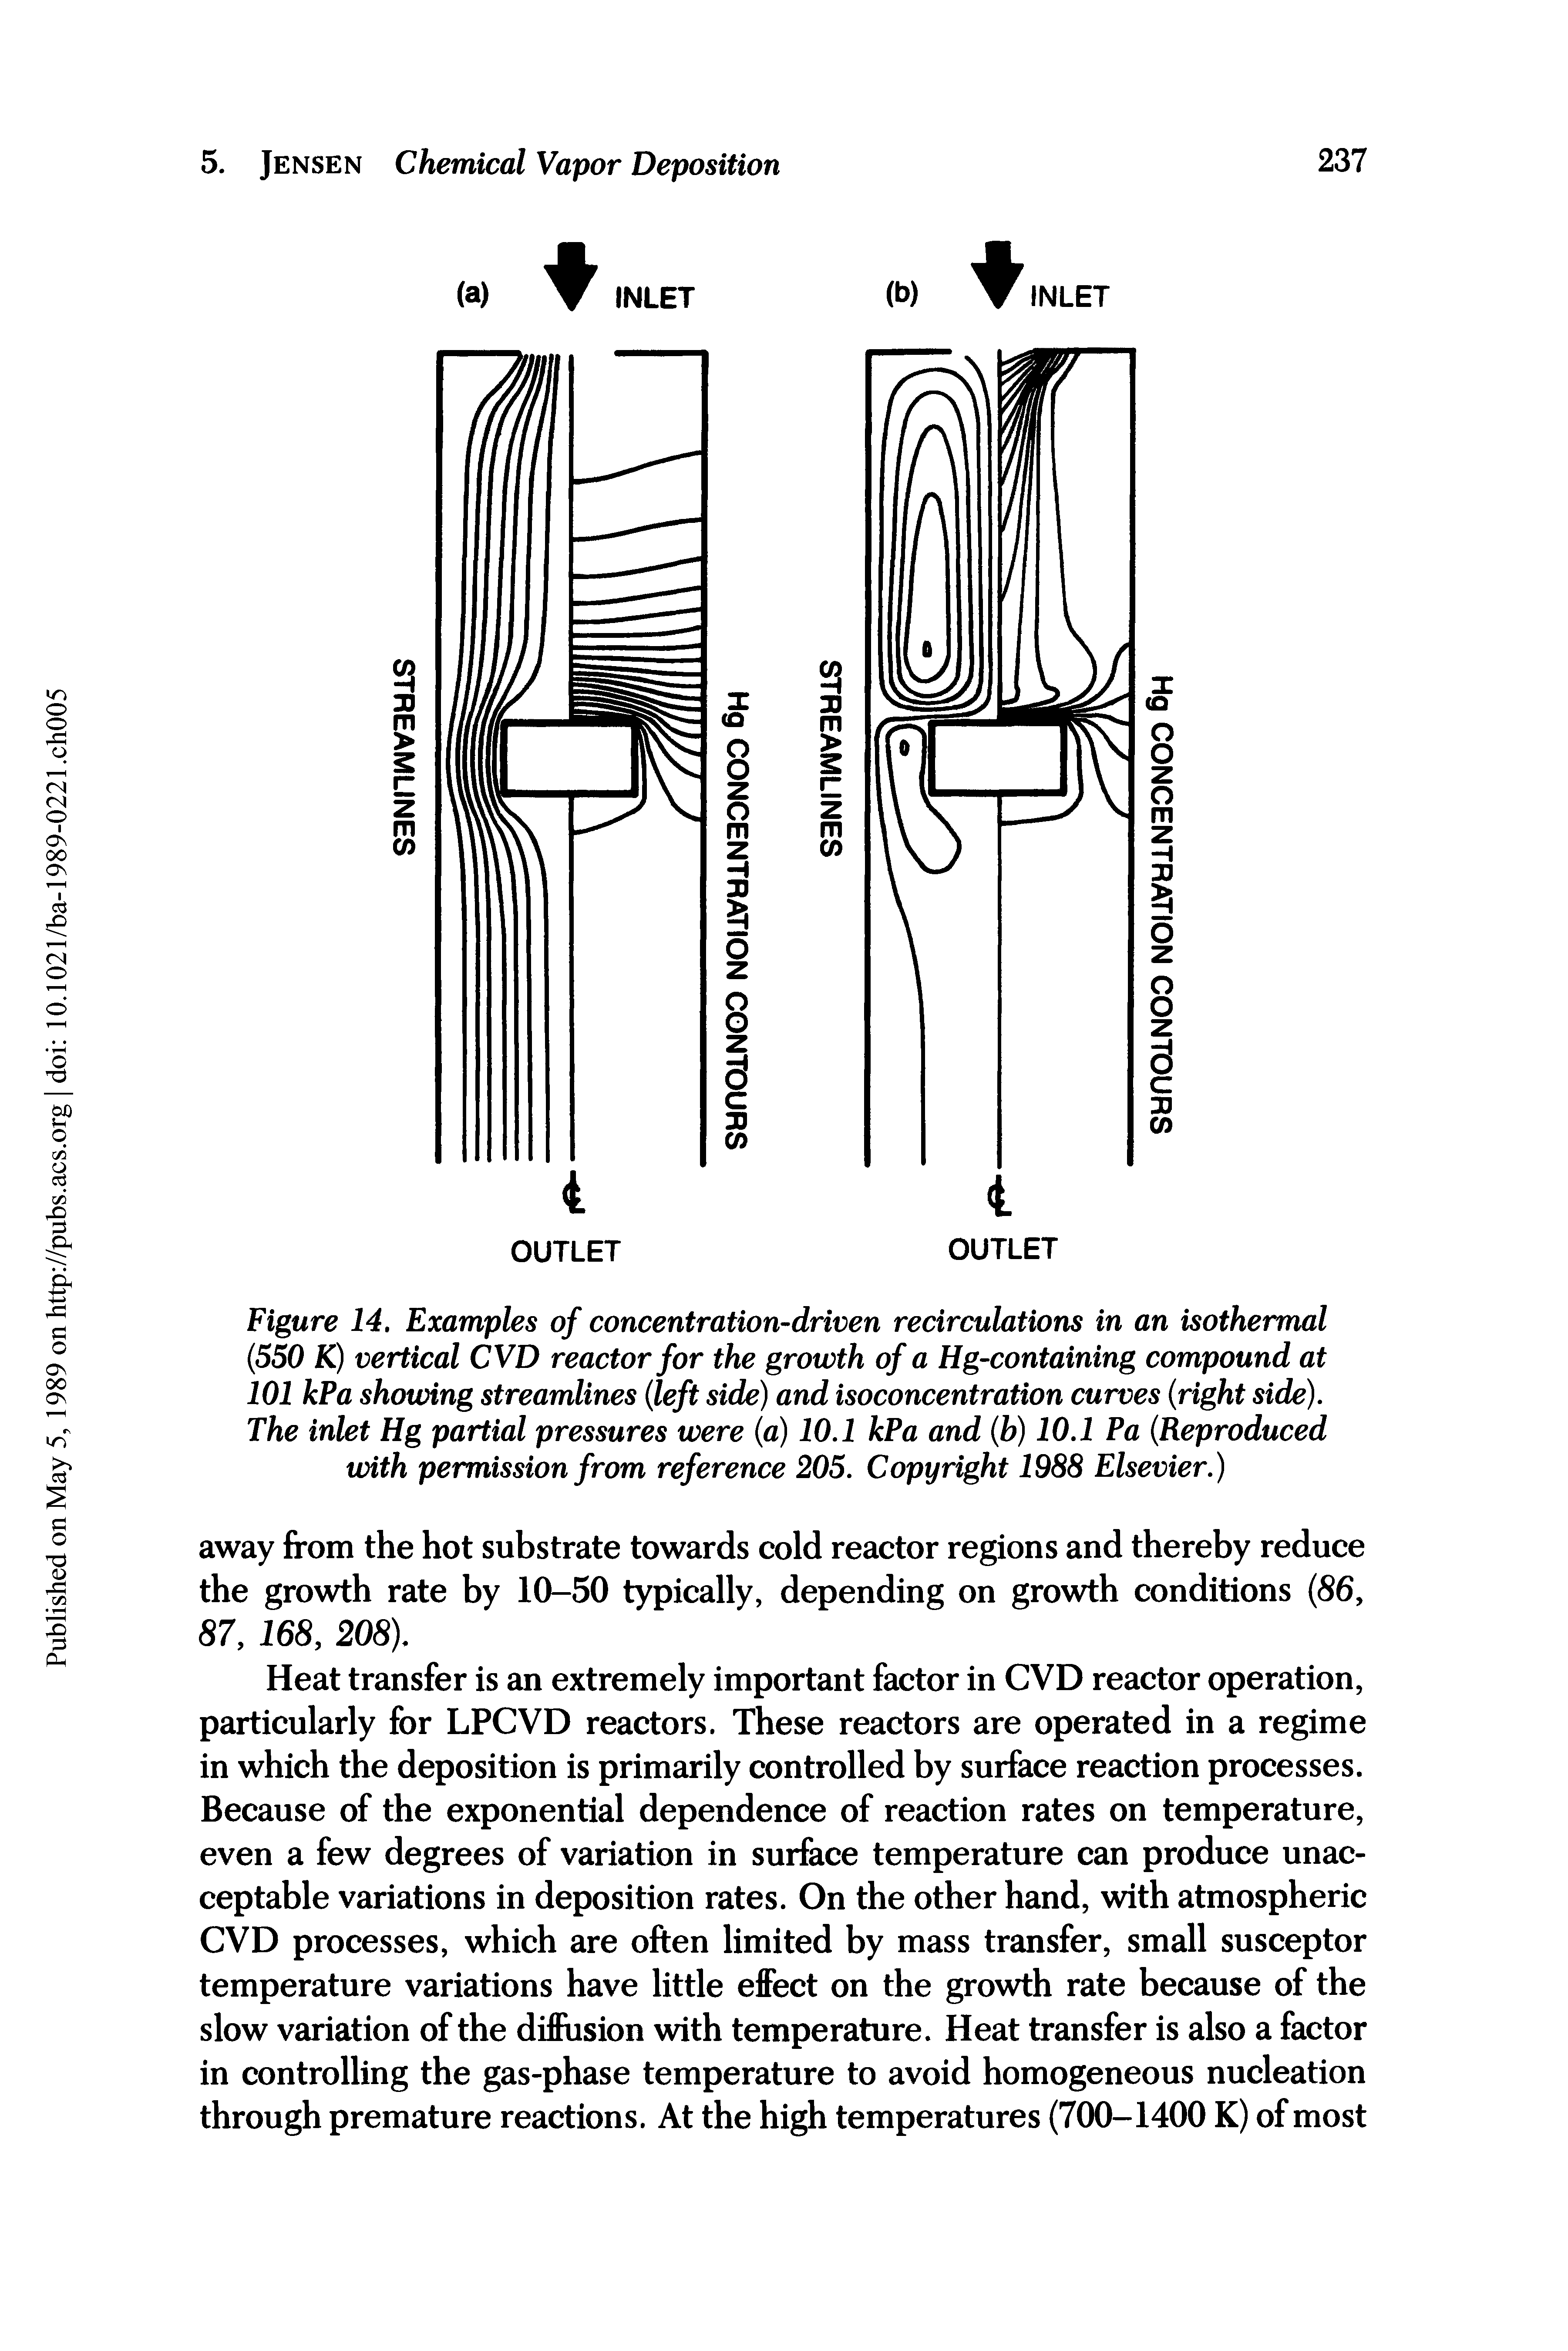 Figure 14. Examples of concentration-driven recirculations in an isothermal (550 K) vertical CVD reactor for the growth of a Hg-containing compound at 101 kPa showing streamlines (left side) and isoconcentration curves (right side). The inlet Hg partial pressures were (a) 10.1 kPa and (b) 10.1 Pa (Reproduced with permission from reference 205. Copyright 1988 Elsevier.)...